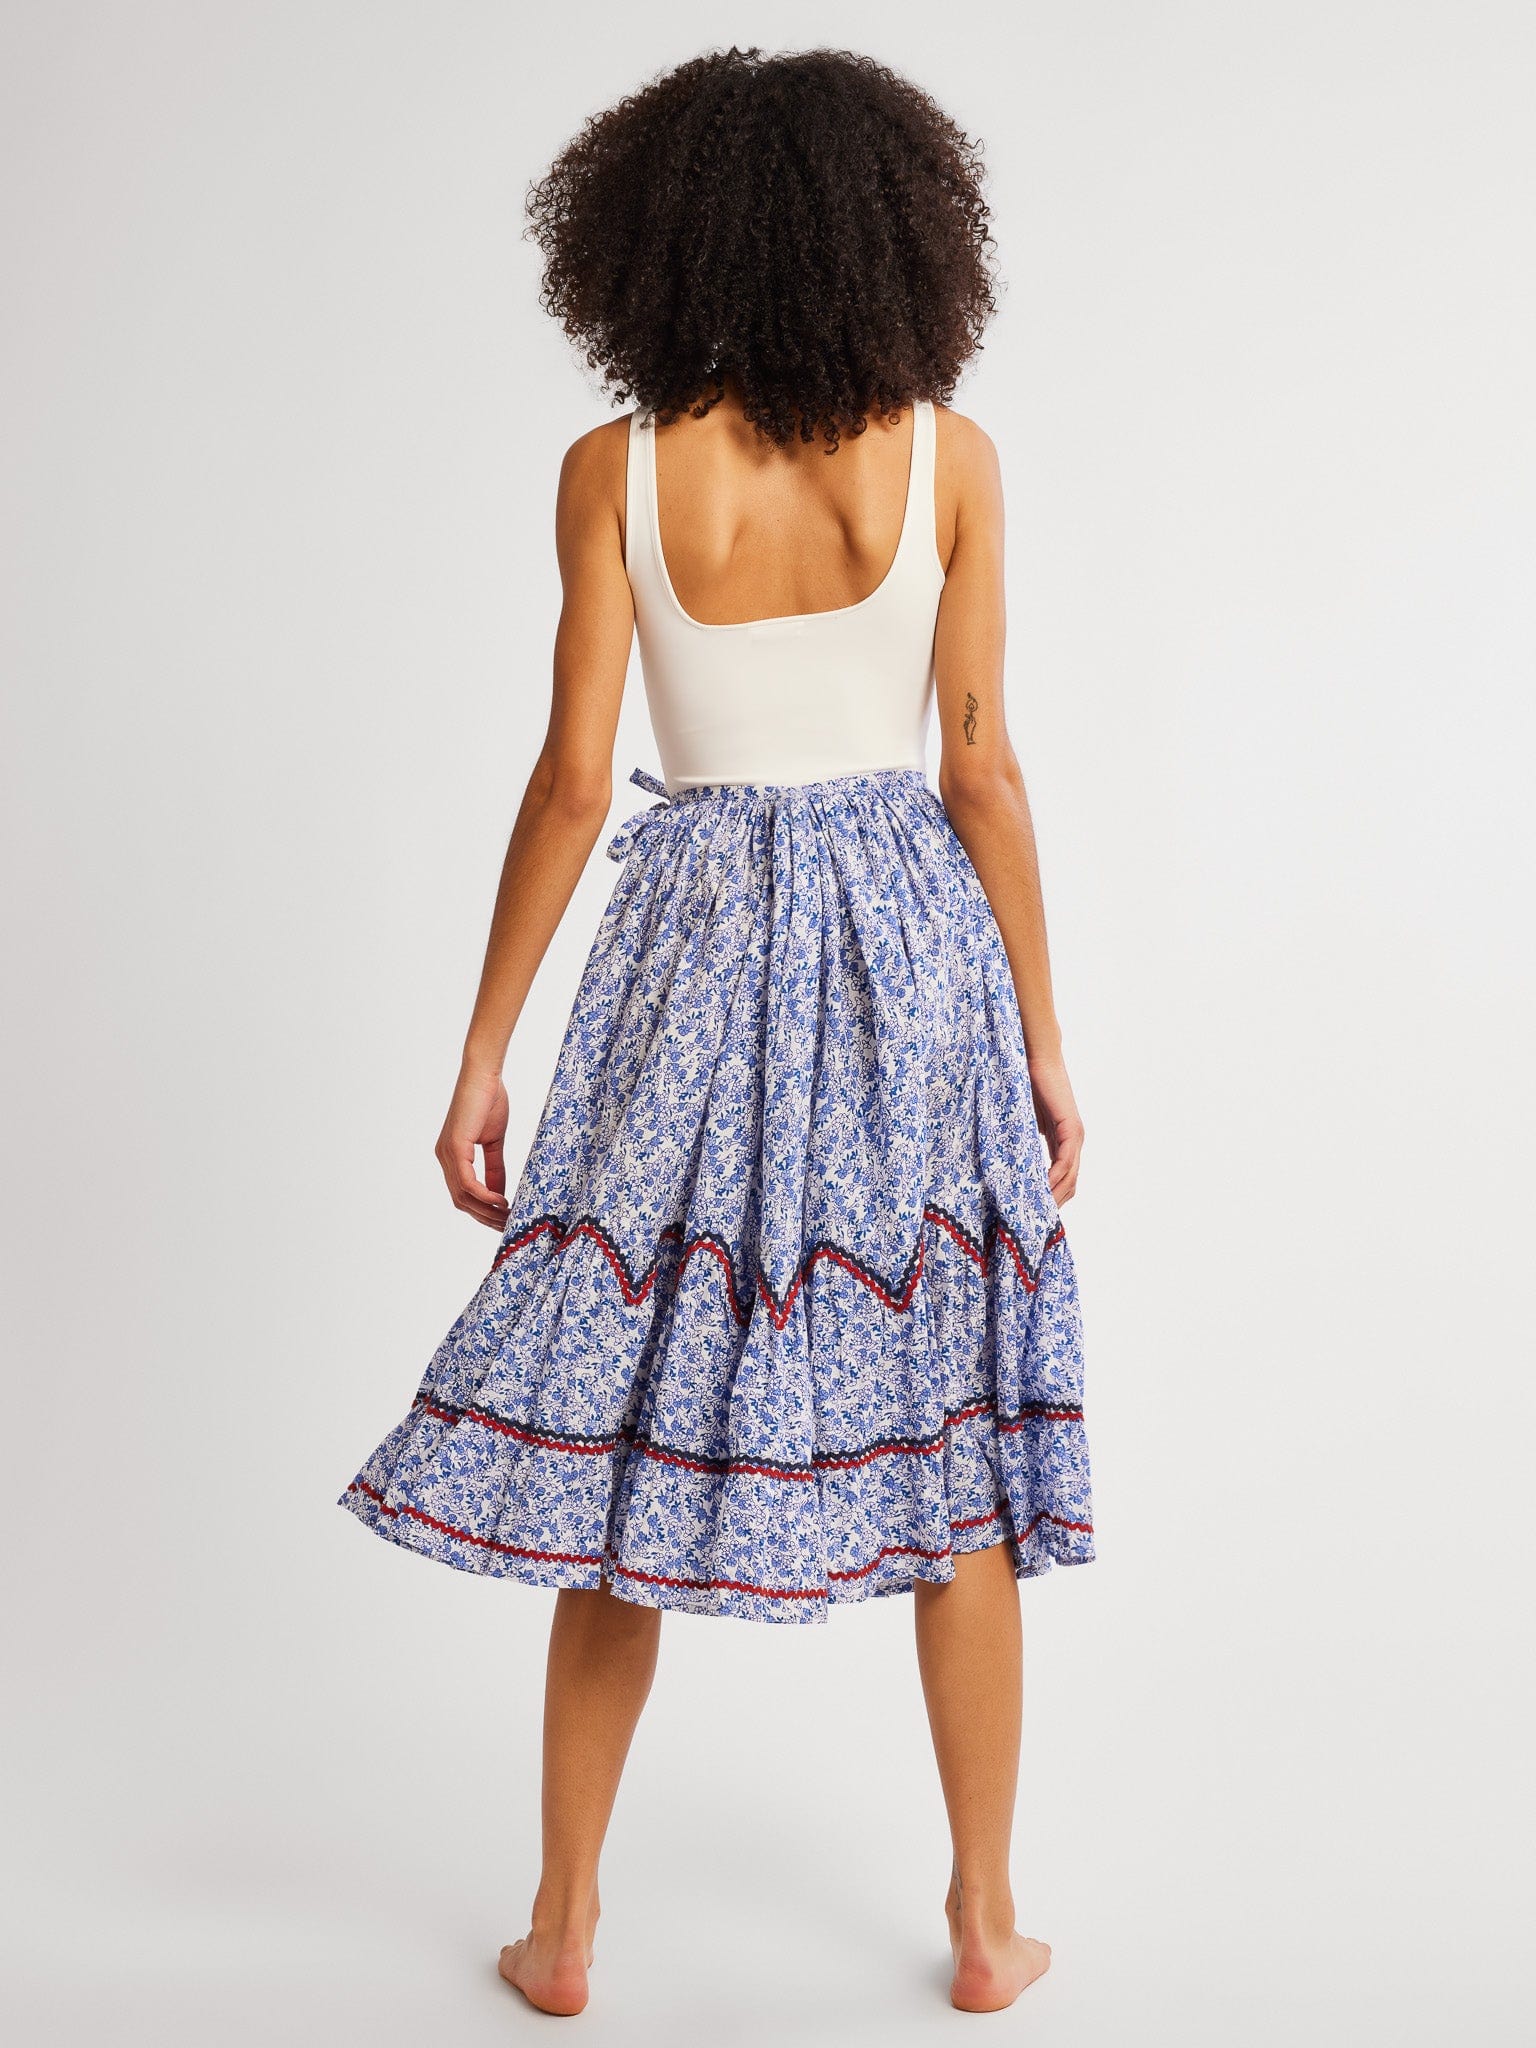 MILLE Clothing Amalie Skirt in Condesa Floral